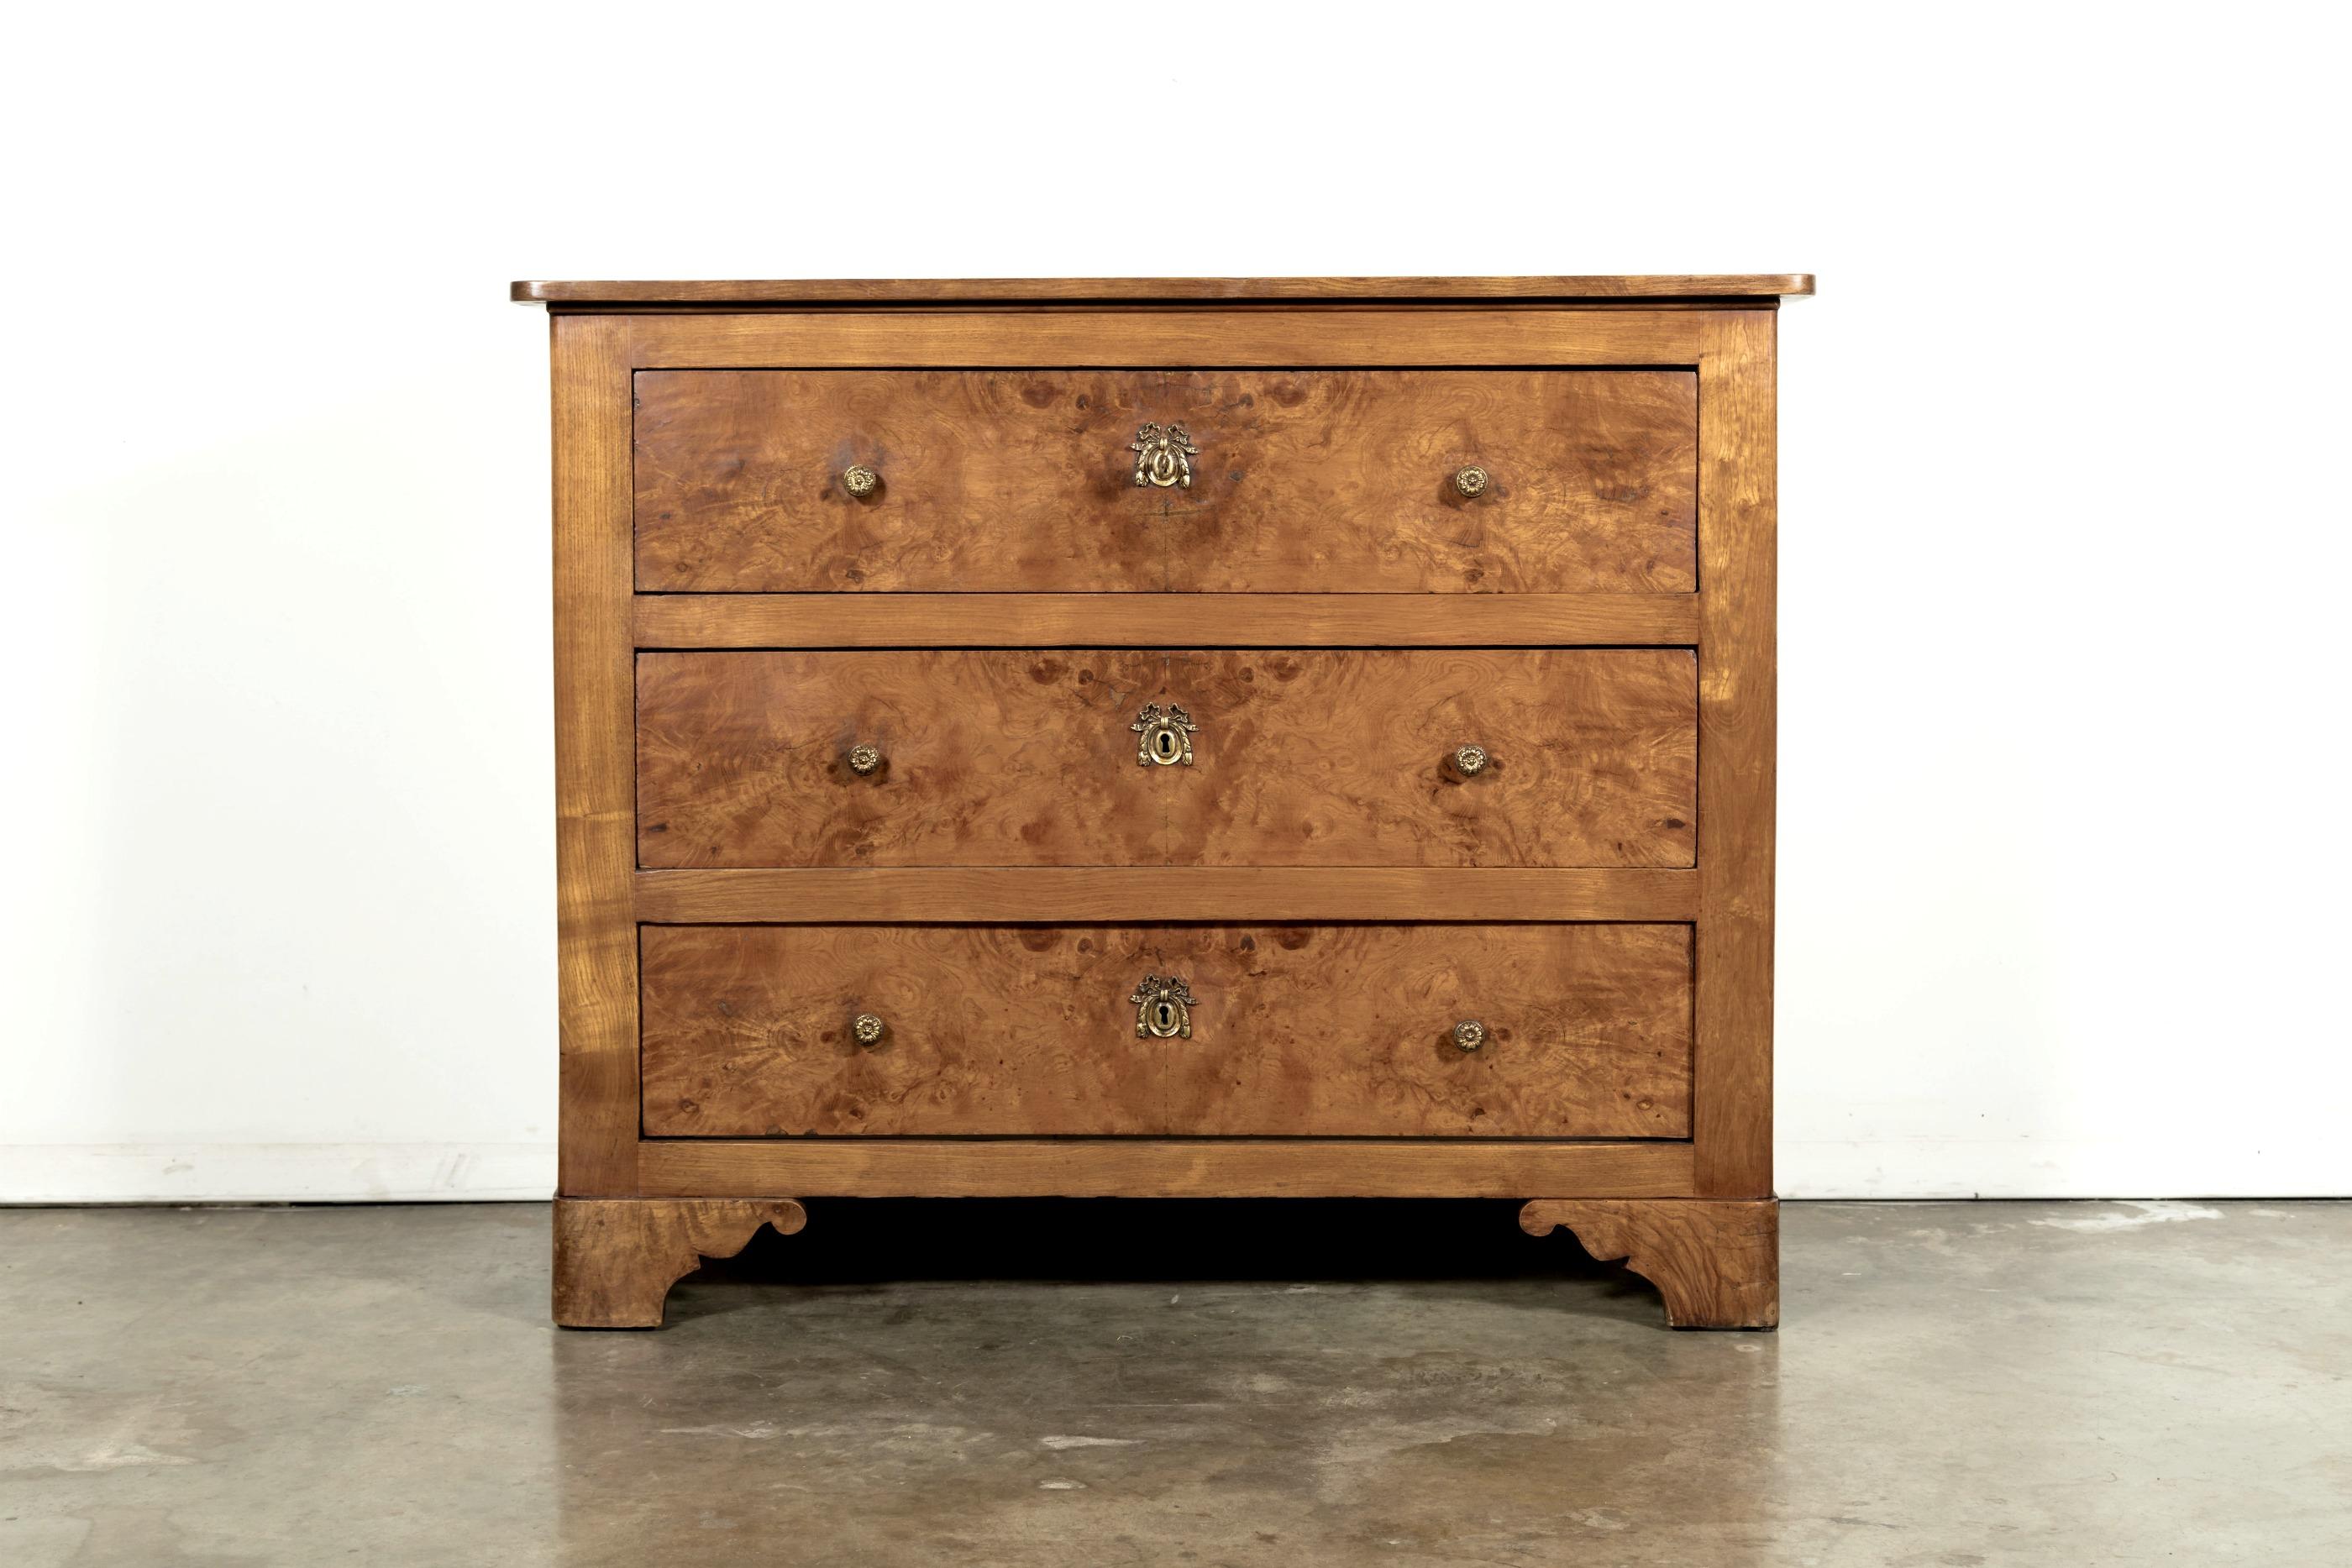 A handsome French Louis Philippe style commode handcrafted of solid chestnut with a bookmatched burled chestnut front. Featuring three fitted long drawers resting upon shaped pistolet feet. Each drawer having a pair of circular pulls with a center